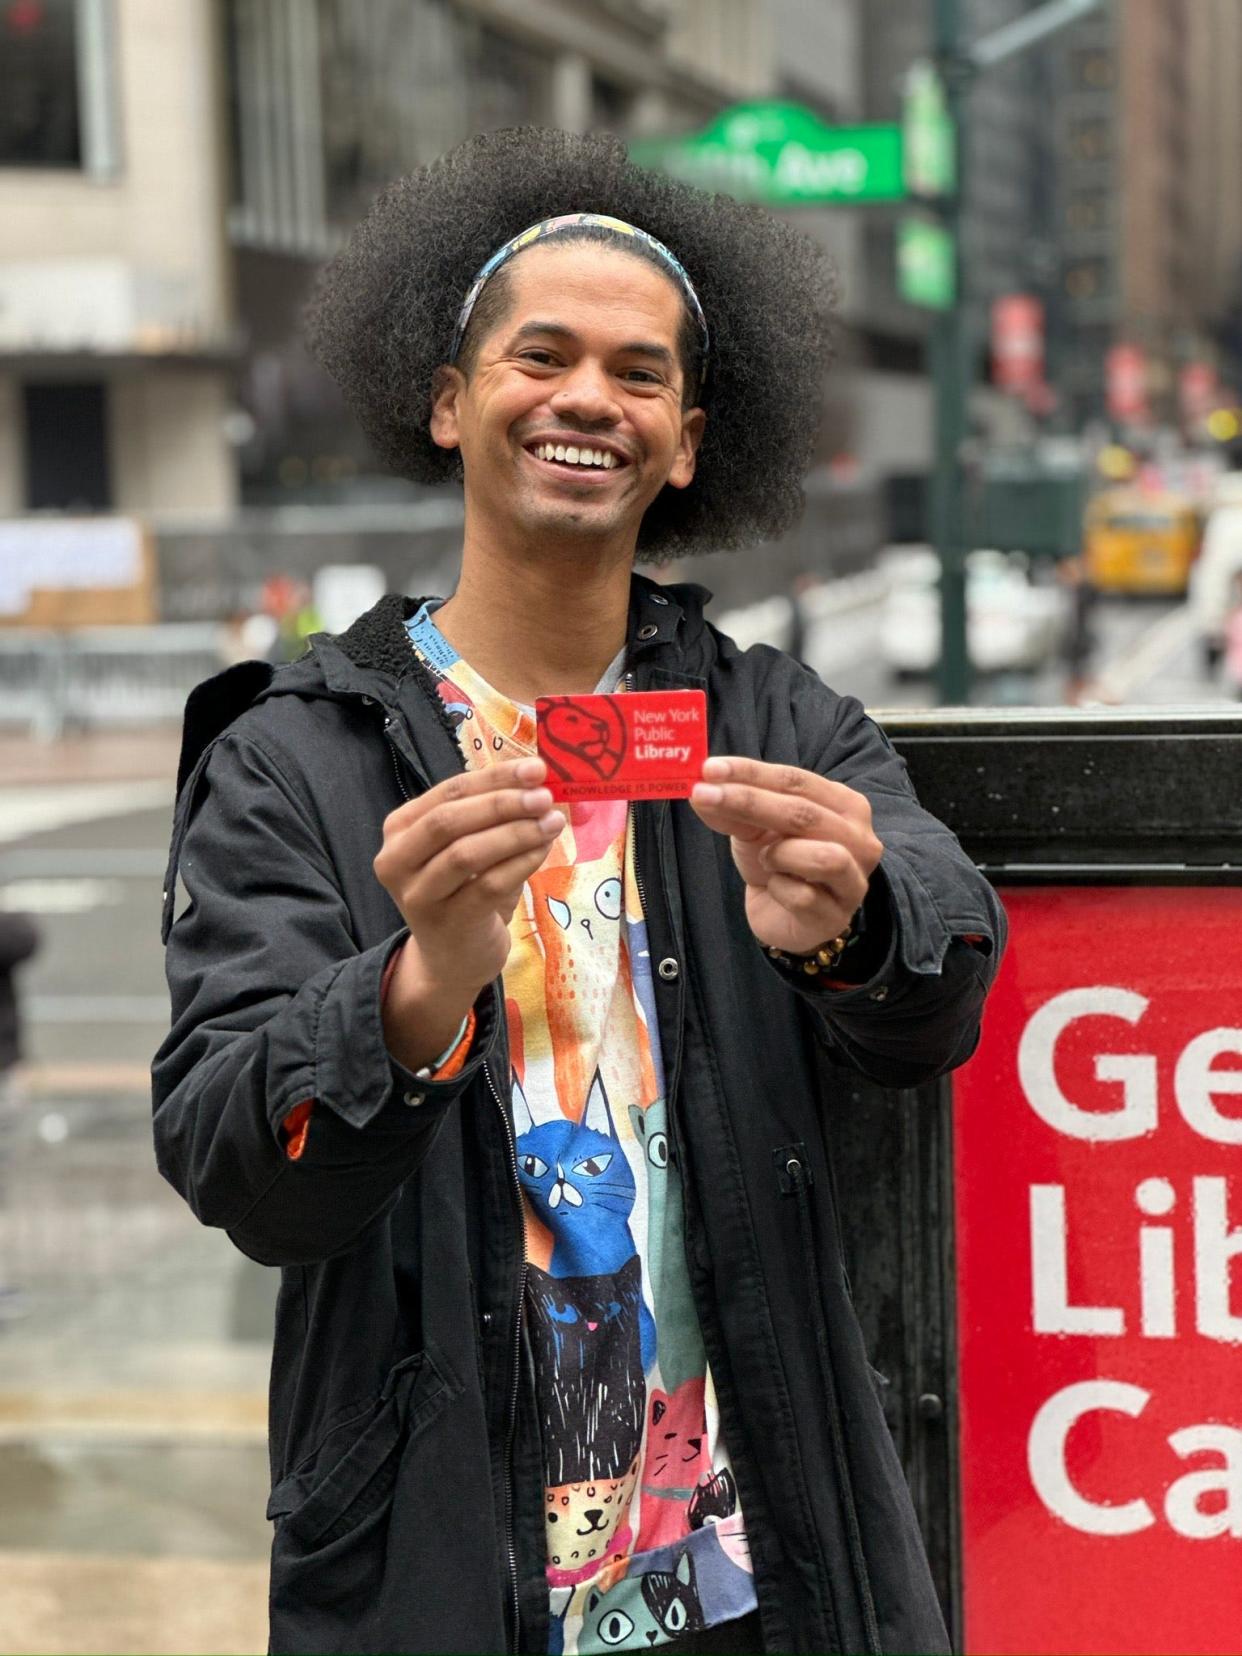 Mychal Threets is an advocate for libraries and literacy, but he's also spoken openly about the importance of mental health and his own struggles.